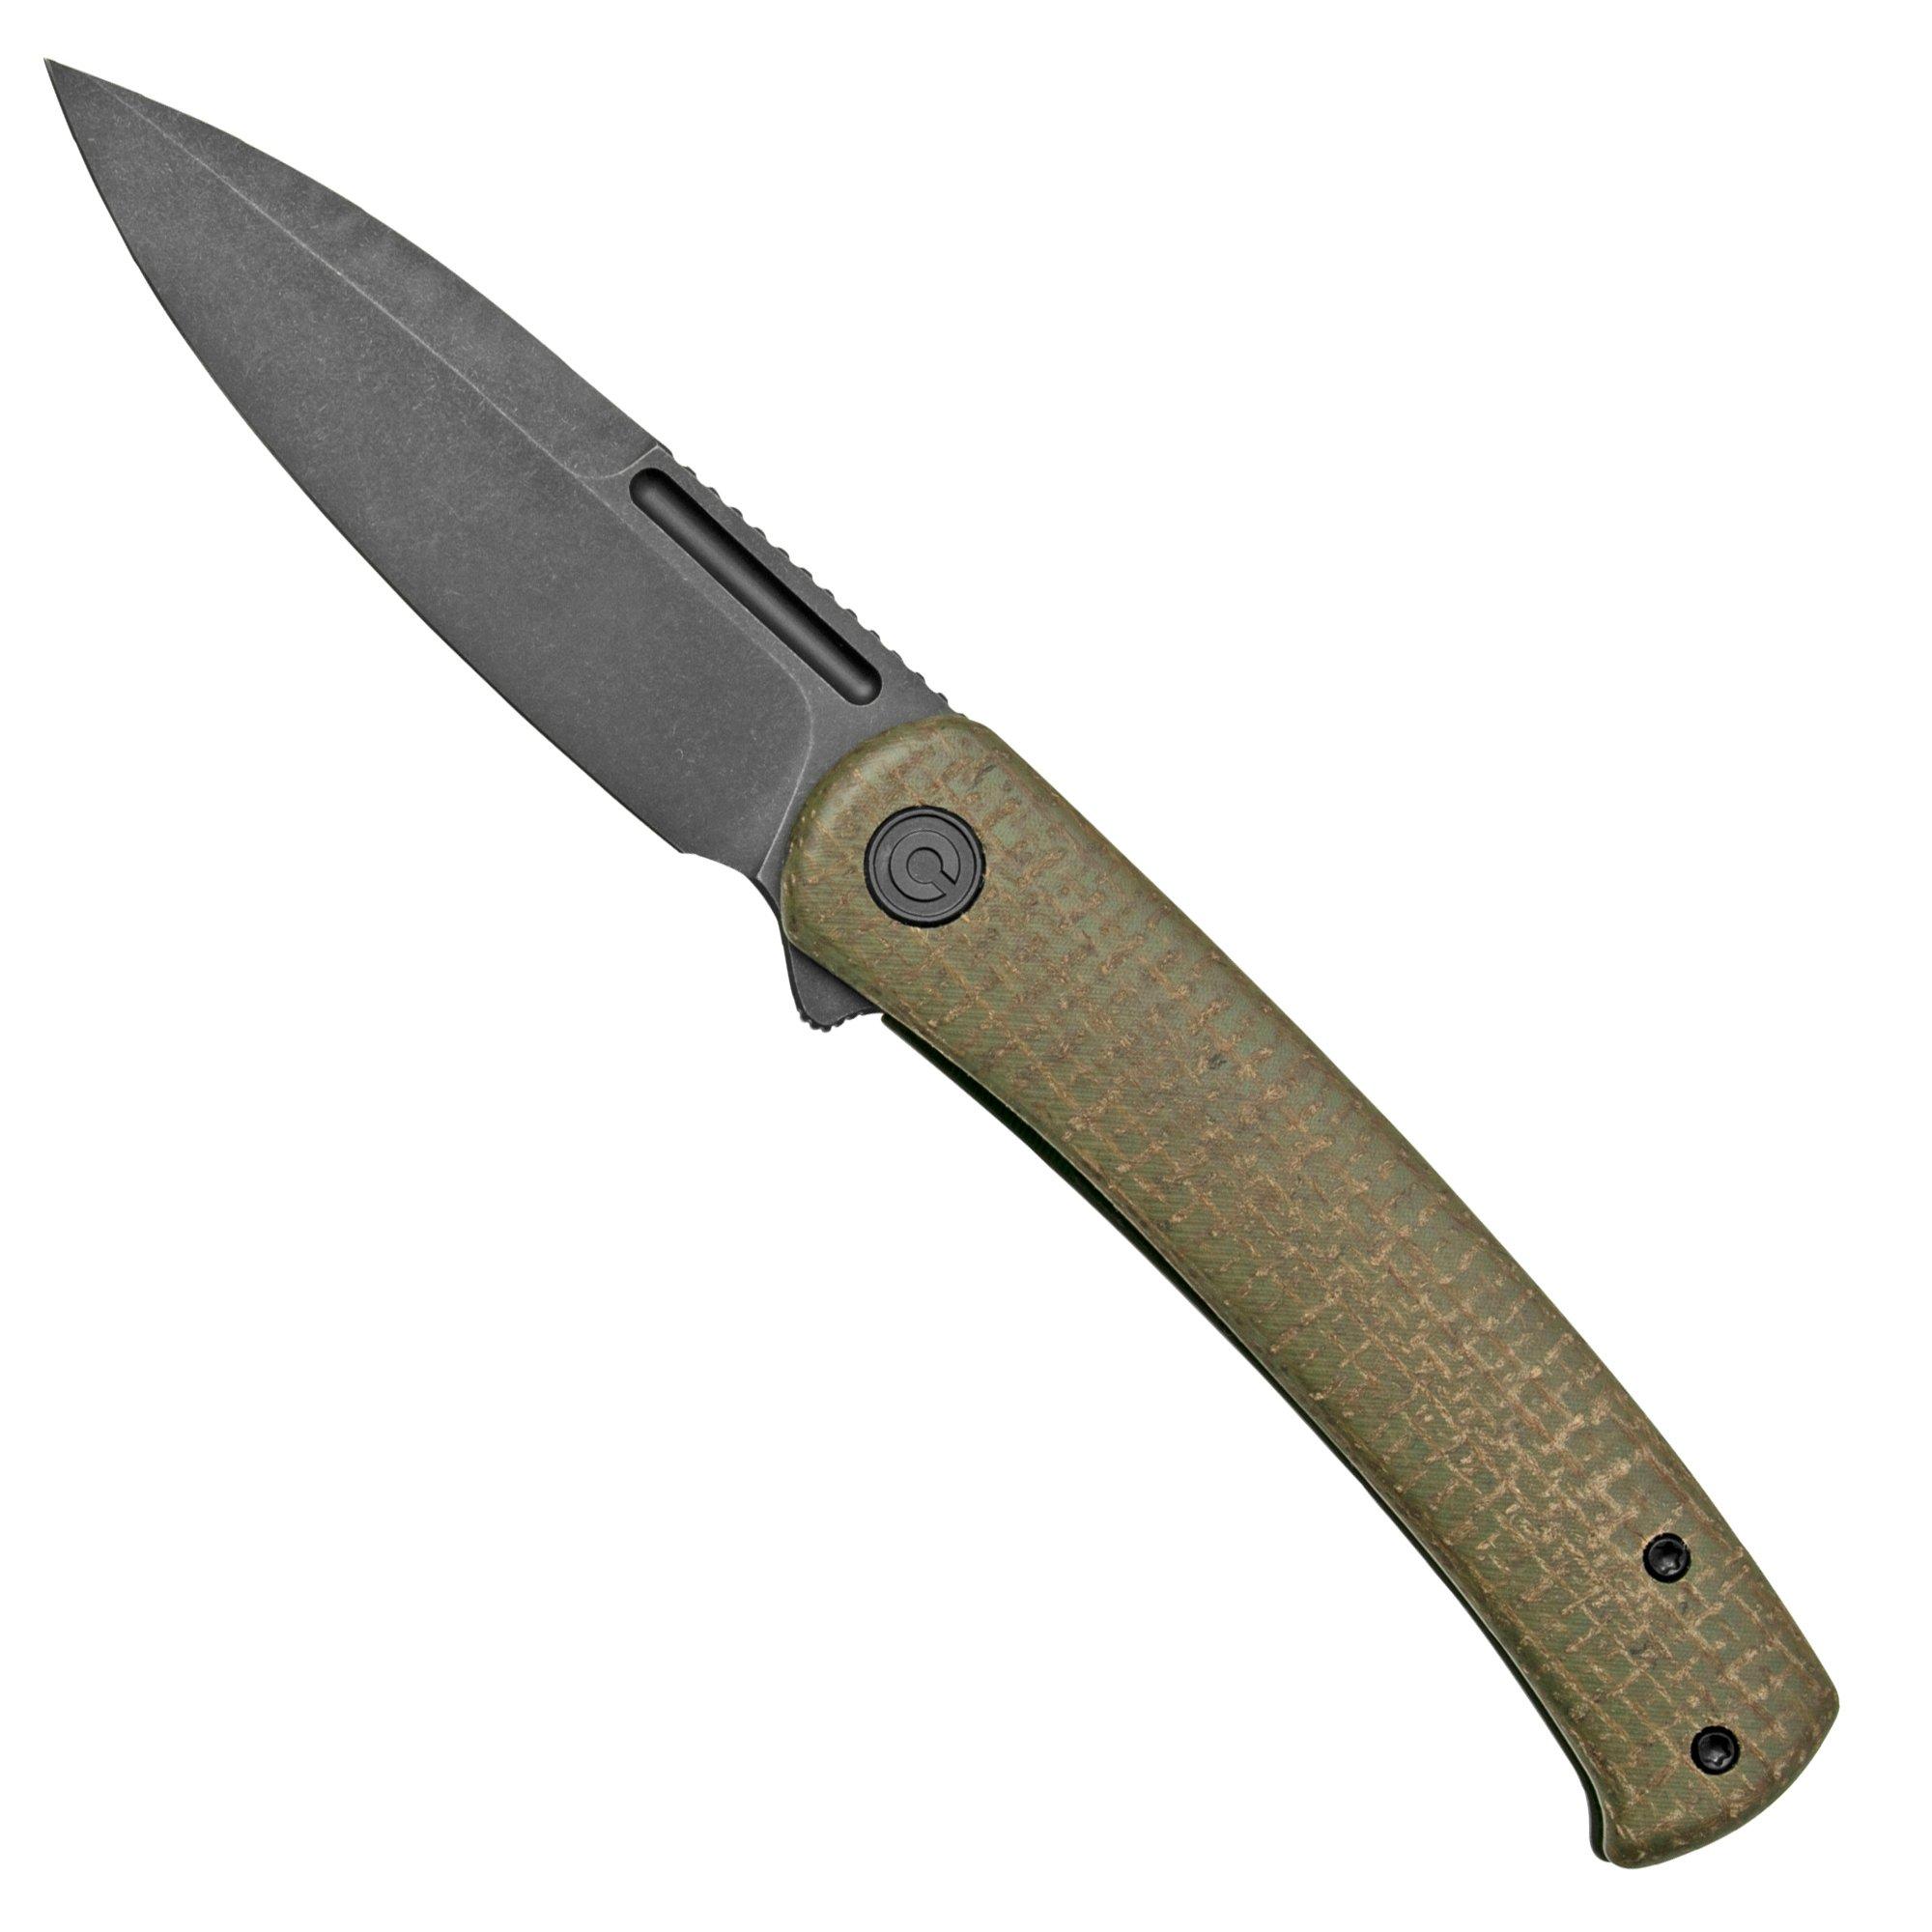 Mora Craft Electrician knife 12201, 1.3 in. Stainless Steel Blade